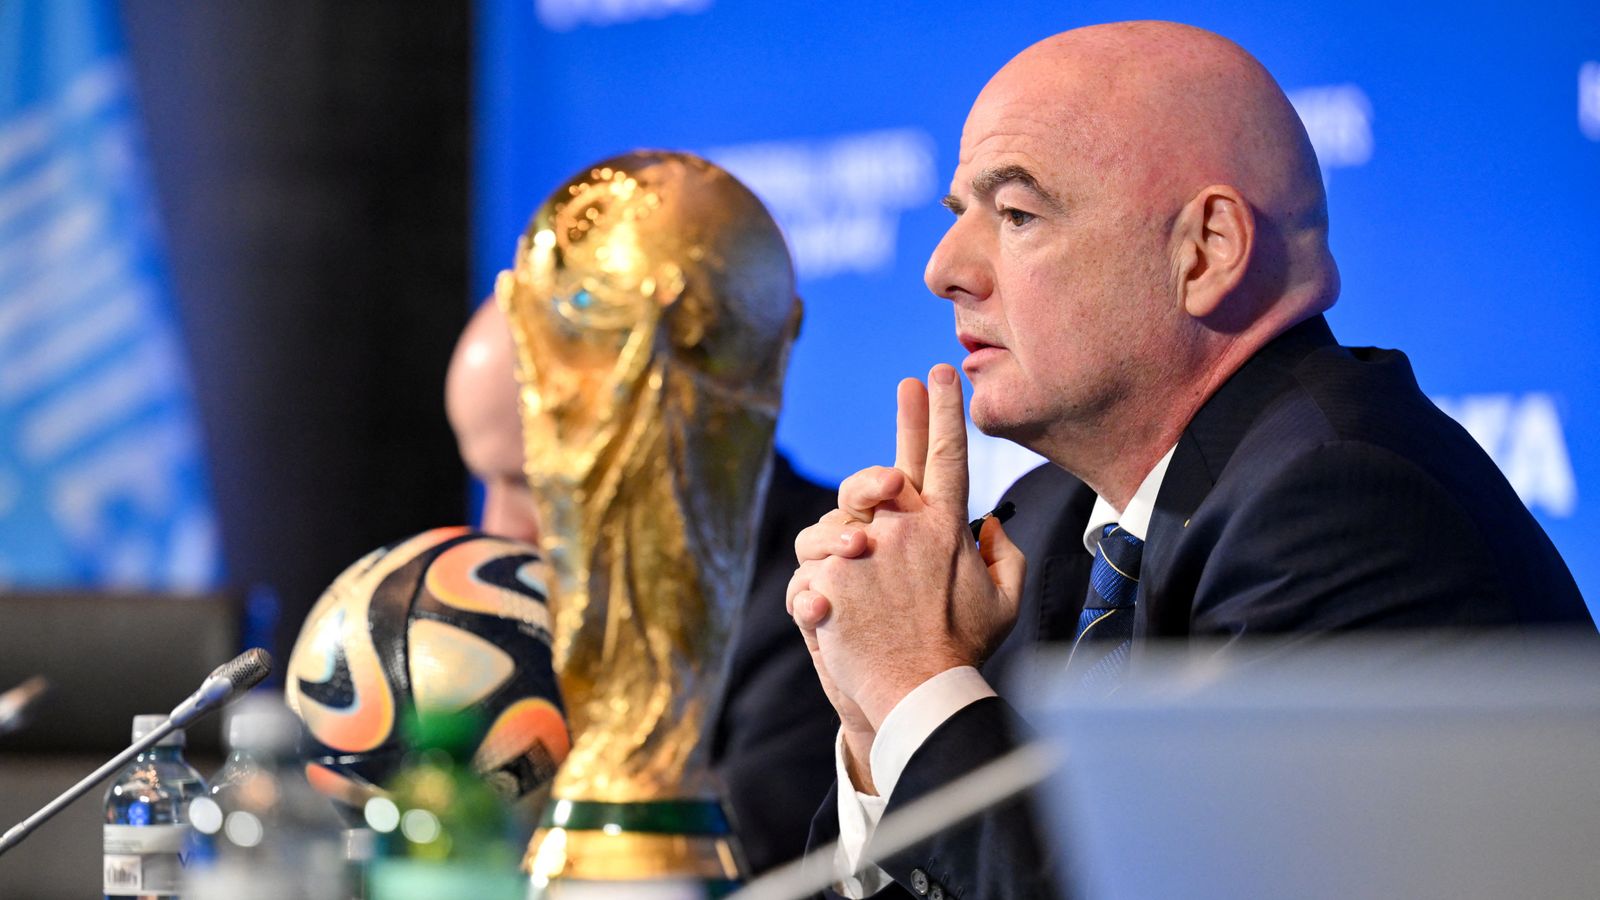 FIFA has 'not changed' and decisions still lack transparency, says former governance chief